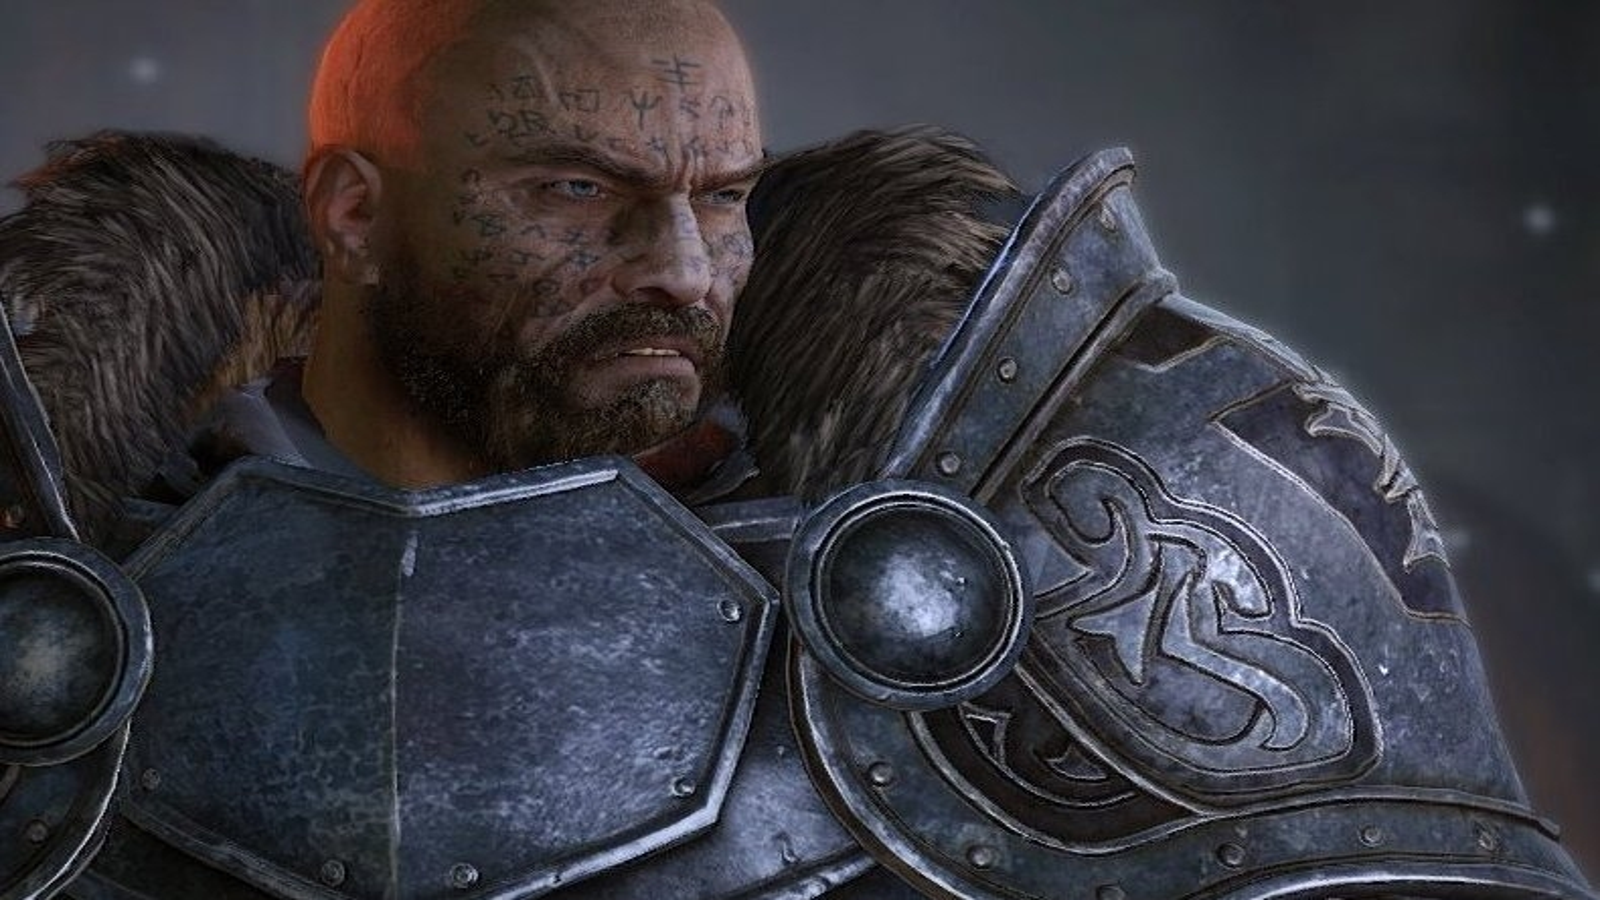 Review in Progress: Lords of the Fallen